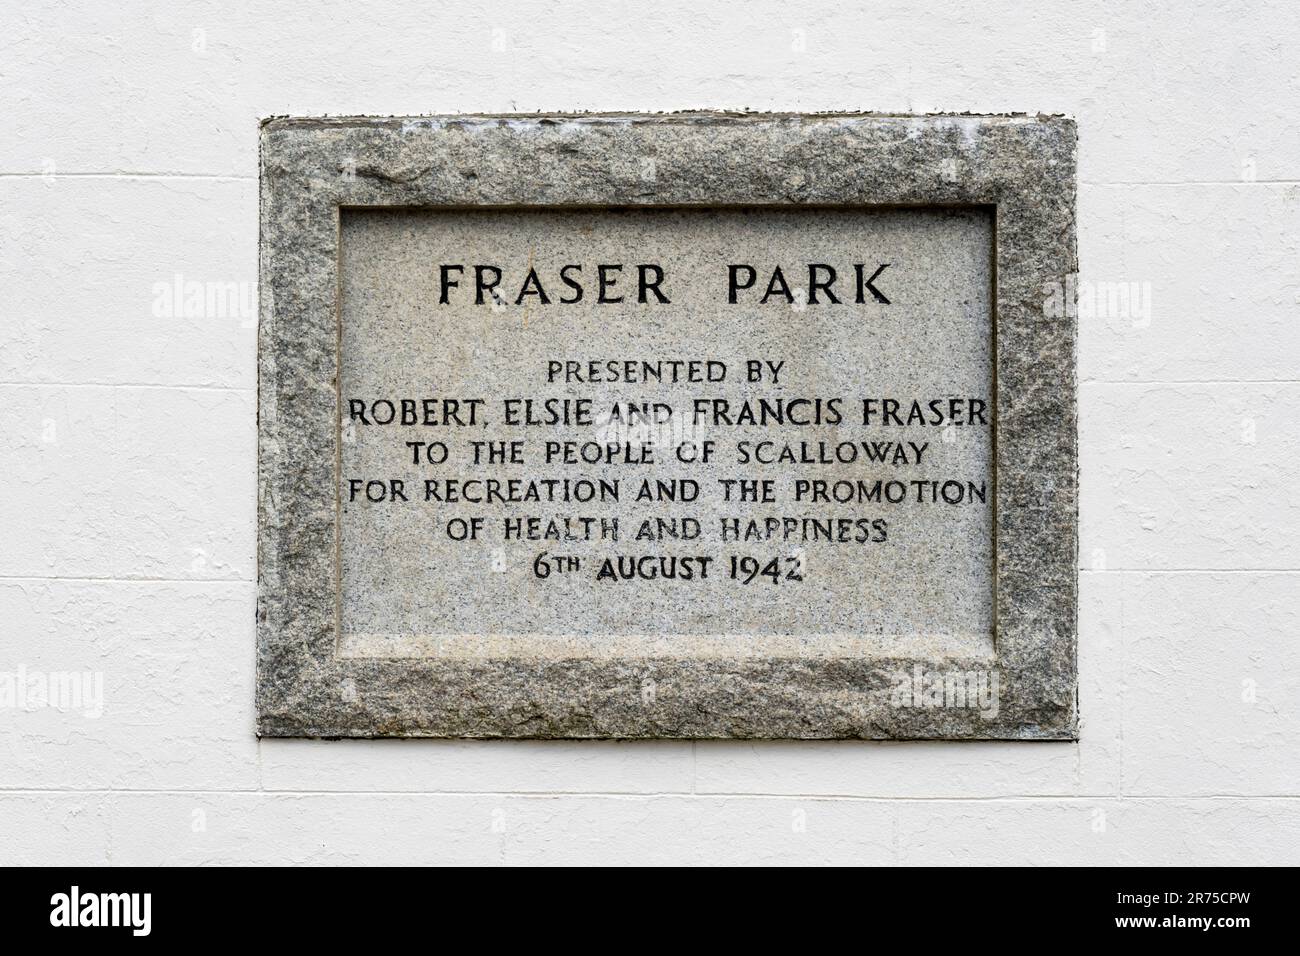 Stone plaque at entrance to Fraser Park, Scalloway on Shetland records the gift of the park by the Fraser family in 1942. Stock Photo